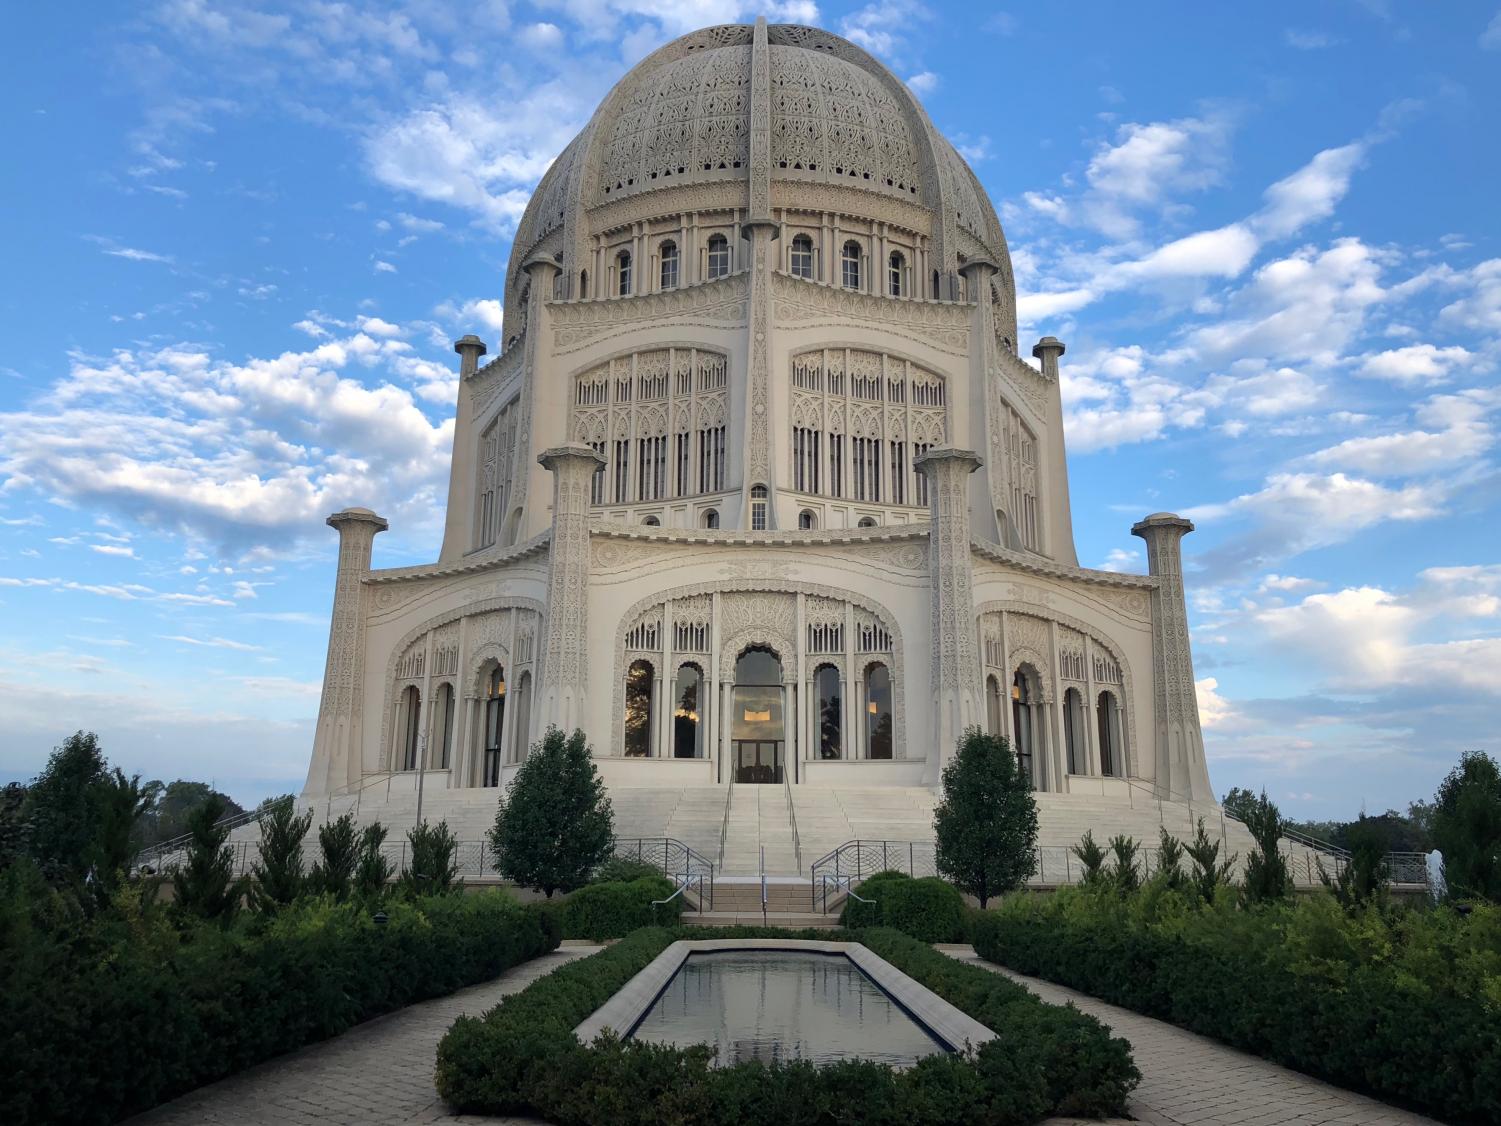 The+Baha%E2%80%99i+House+of+Worship%2C+located+just+a+few+minutes+from+campus.+There+are+plenty+of+religious+organizations+at+Northwestern+that+can+help+you+feel+more+at+home+when+you%E2%80%99re+away+from+home.